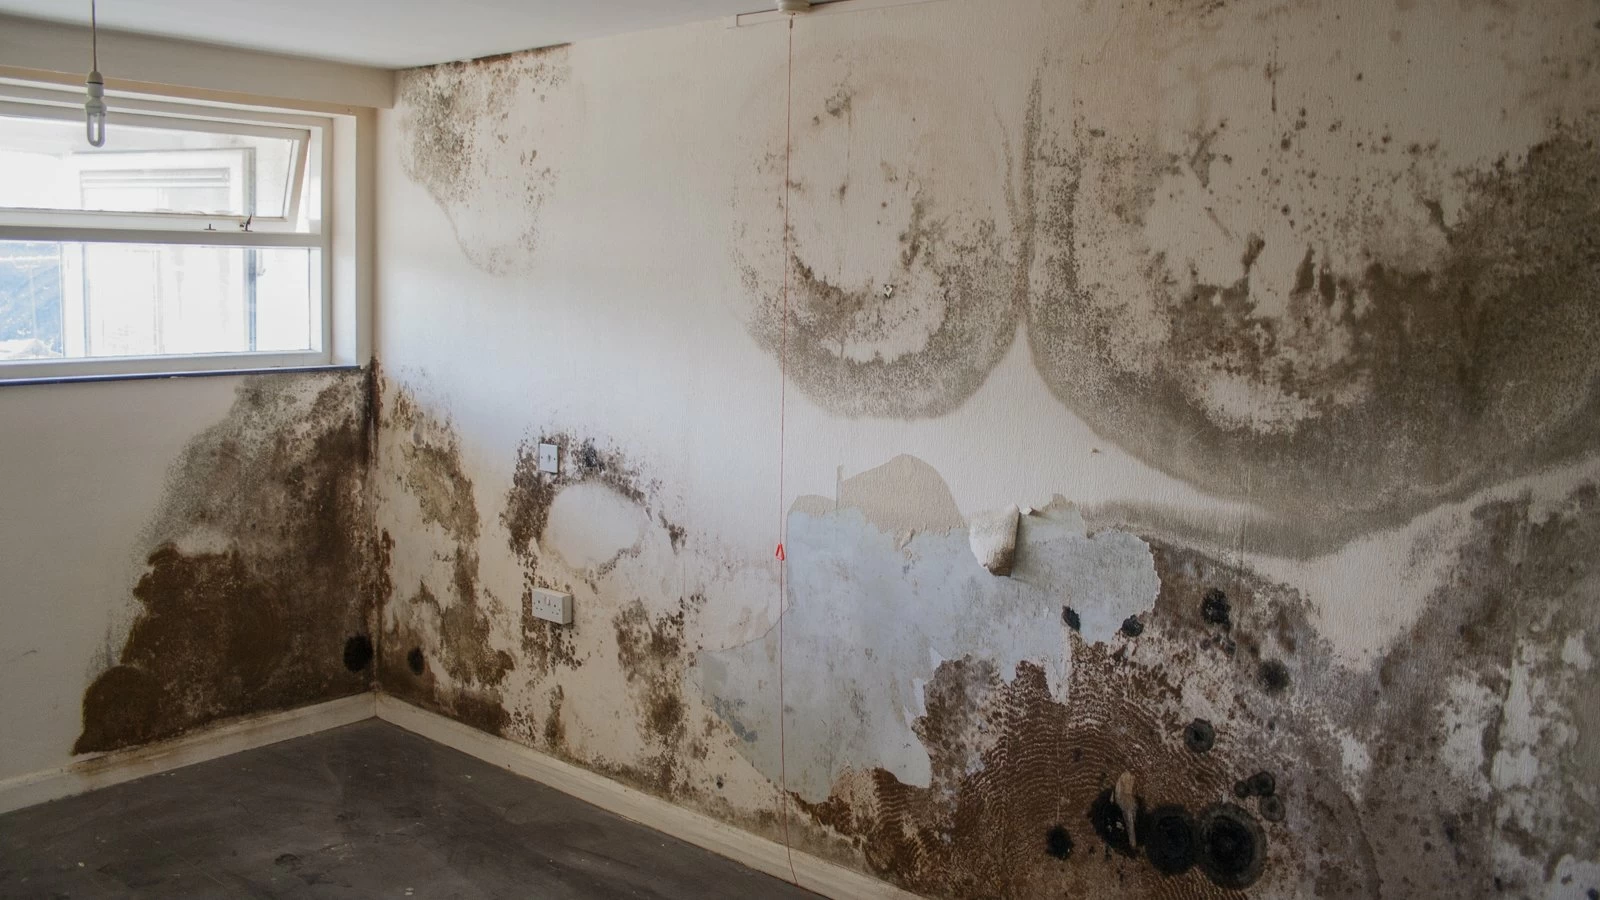 penetrating damp and mould